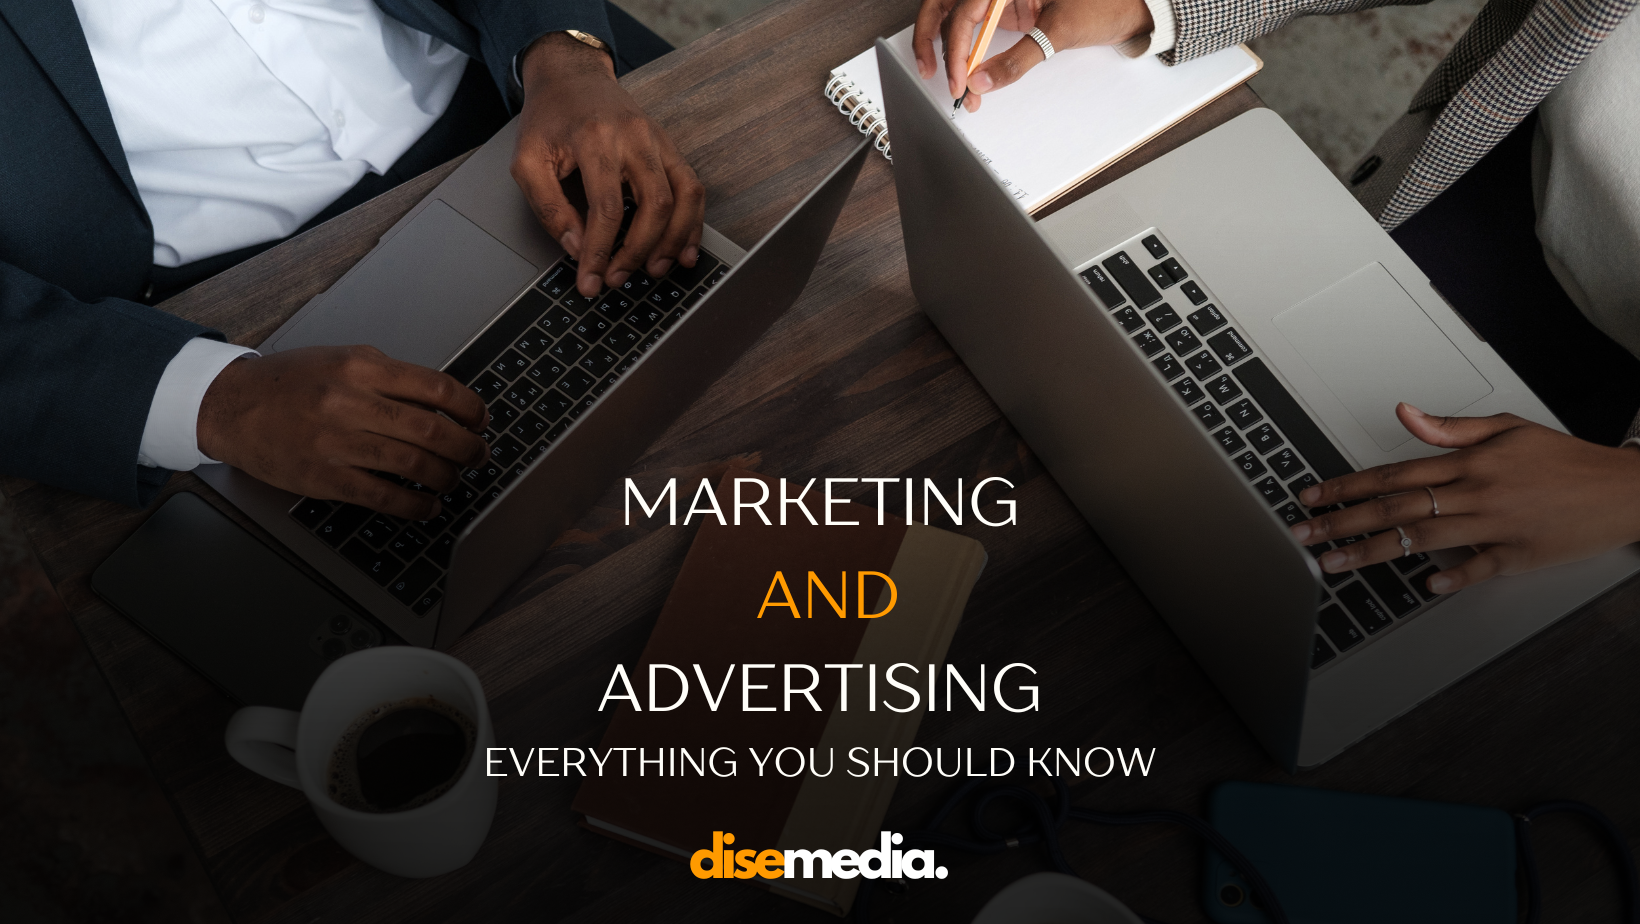 Marketing and Advertising: Everything You Should Know